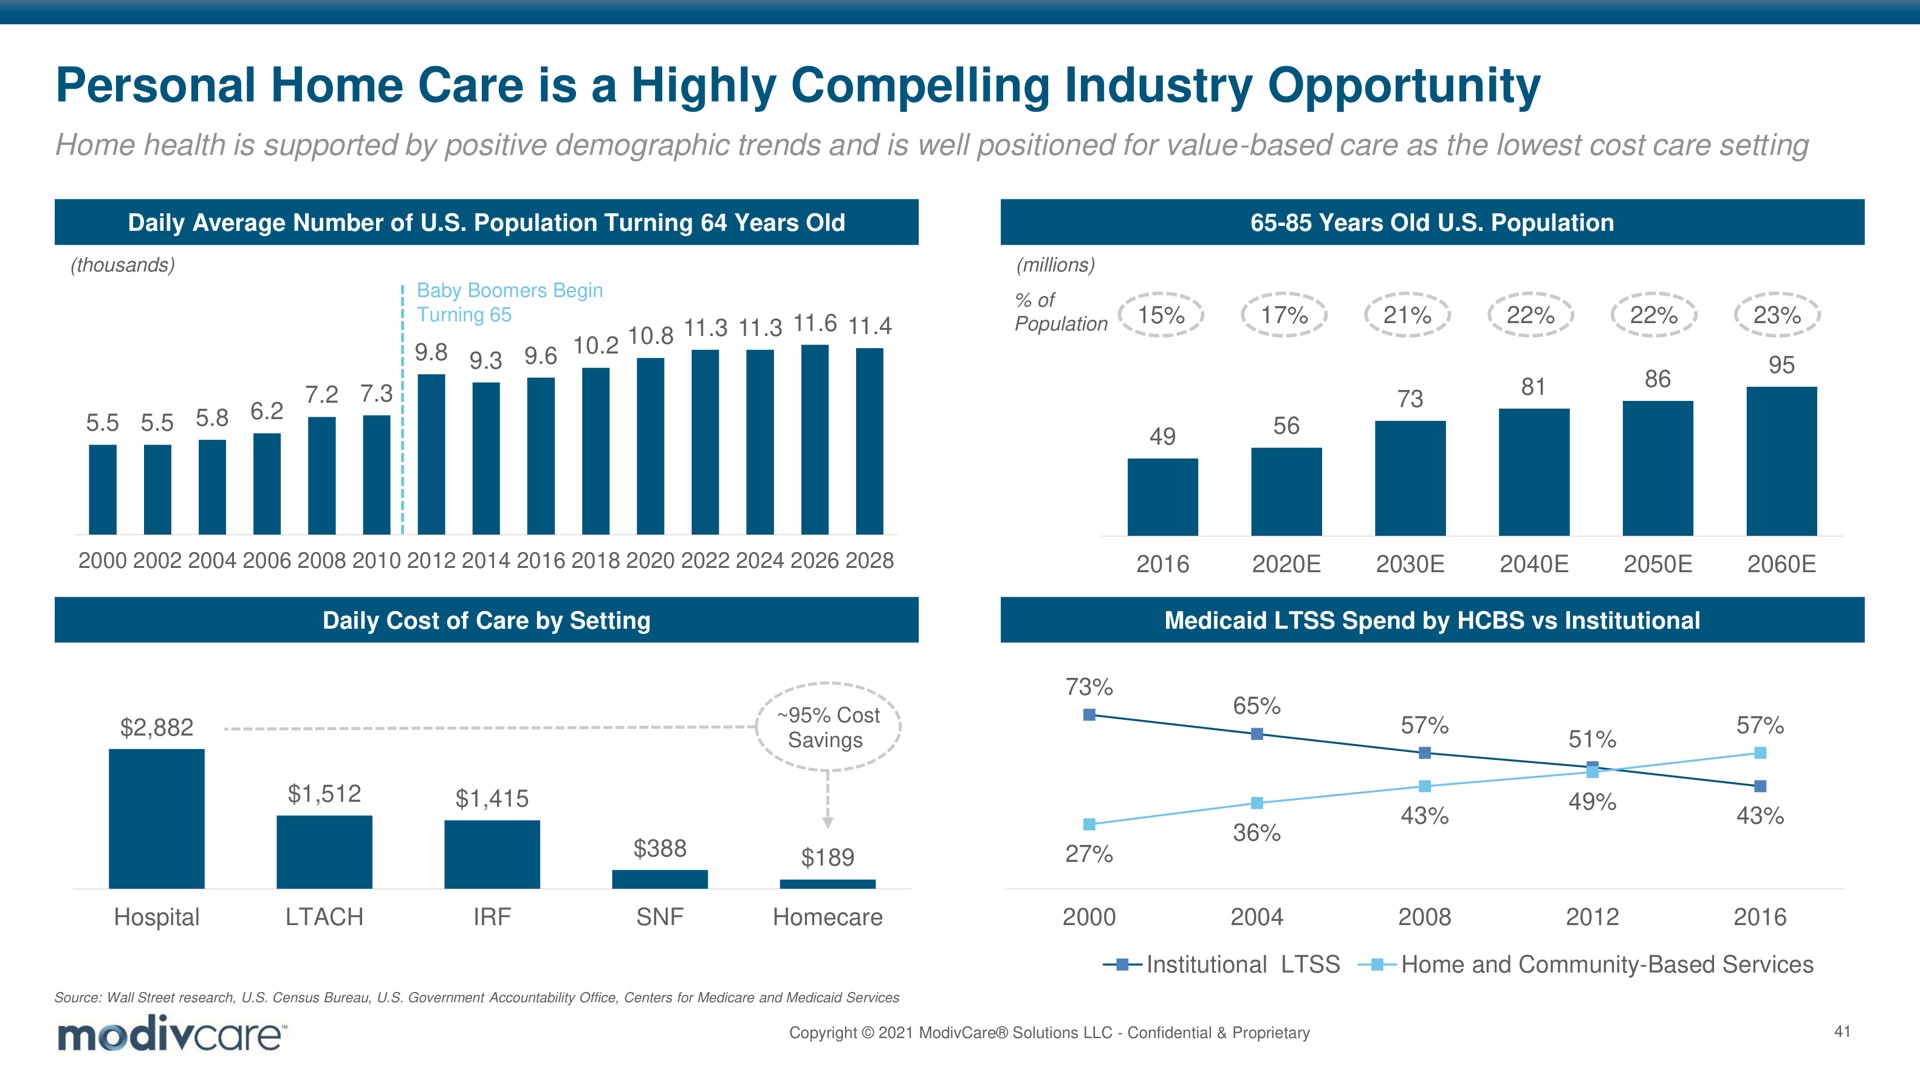 personal home care is a highly compelling industry opportunity | ModivCare